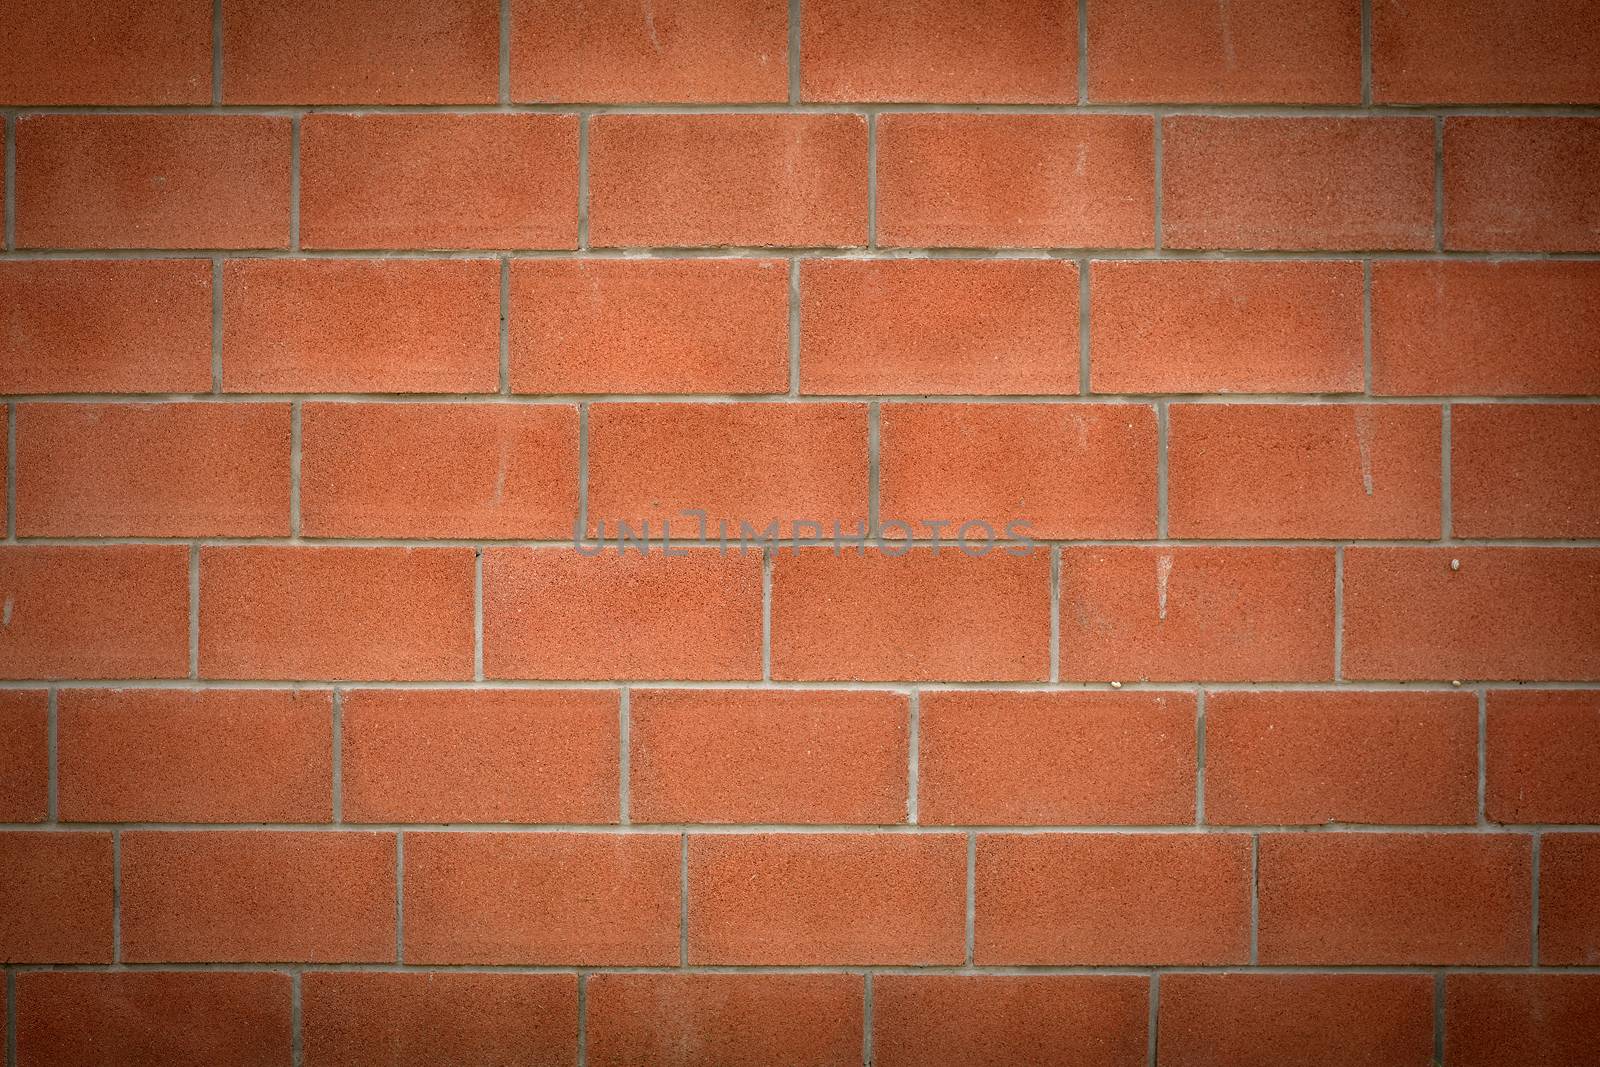 Abstract brick red wall. Vignetting at the edges